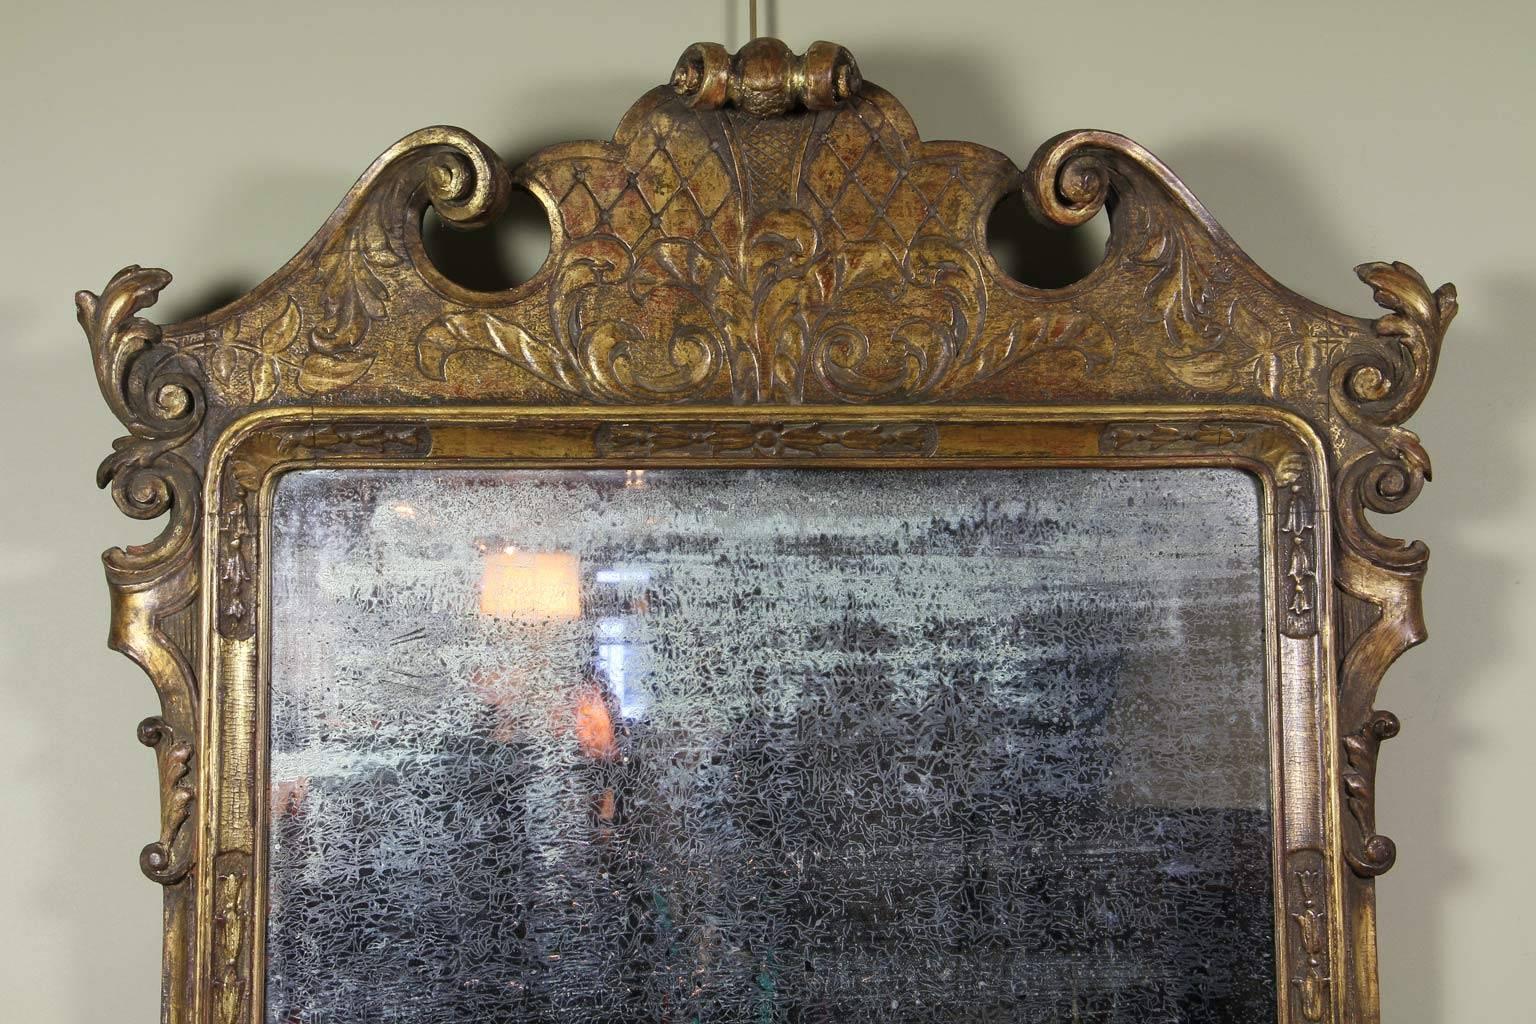 With old distressed mirror plate set in a nicely carved and gilded frame.